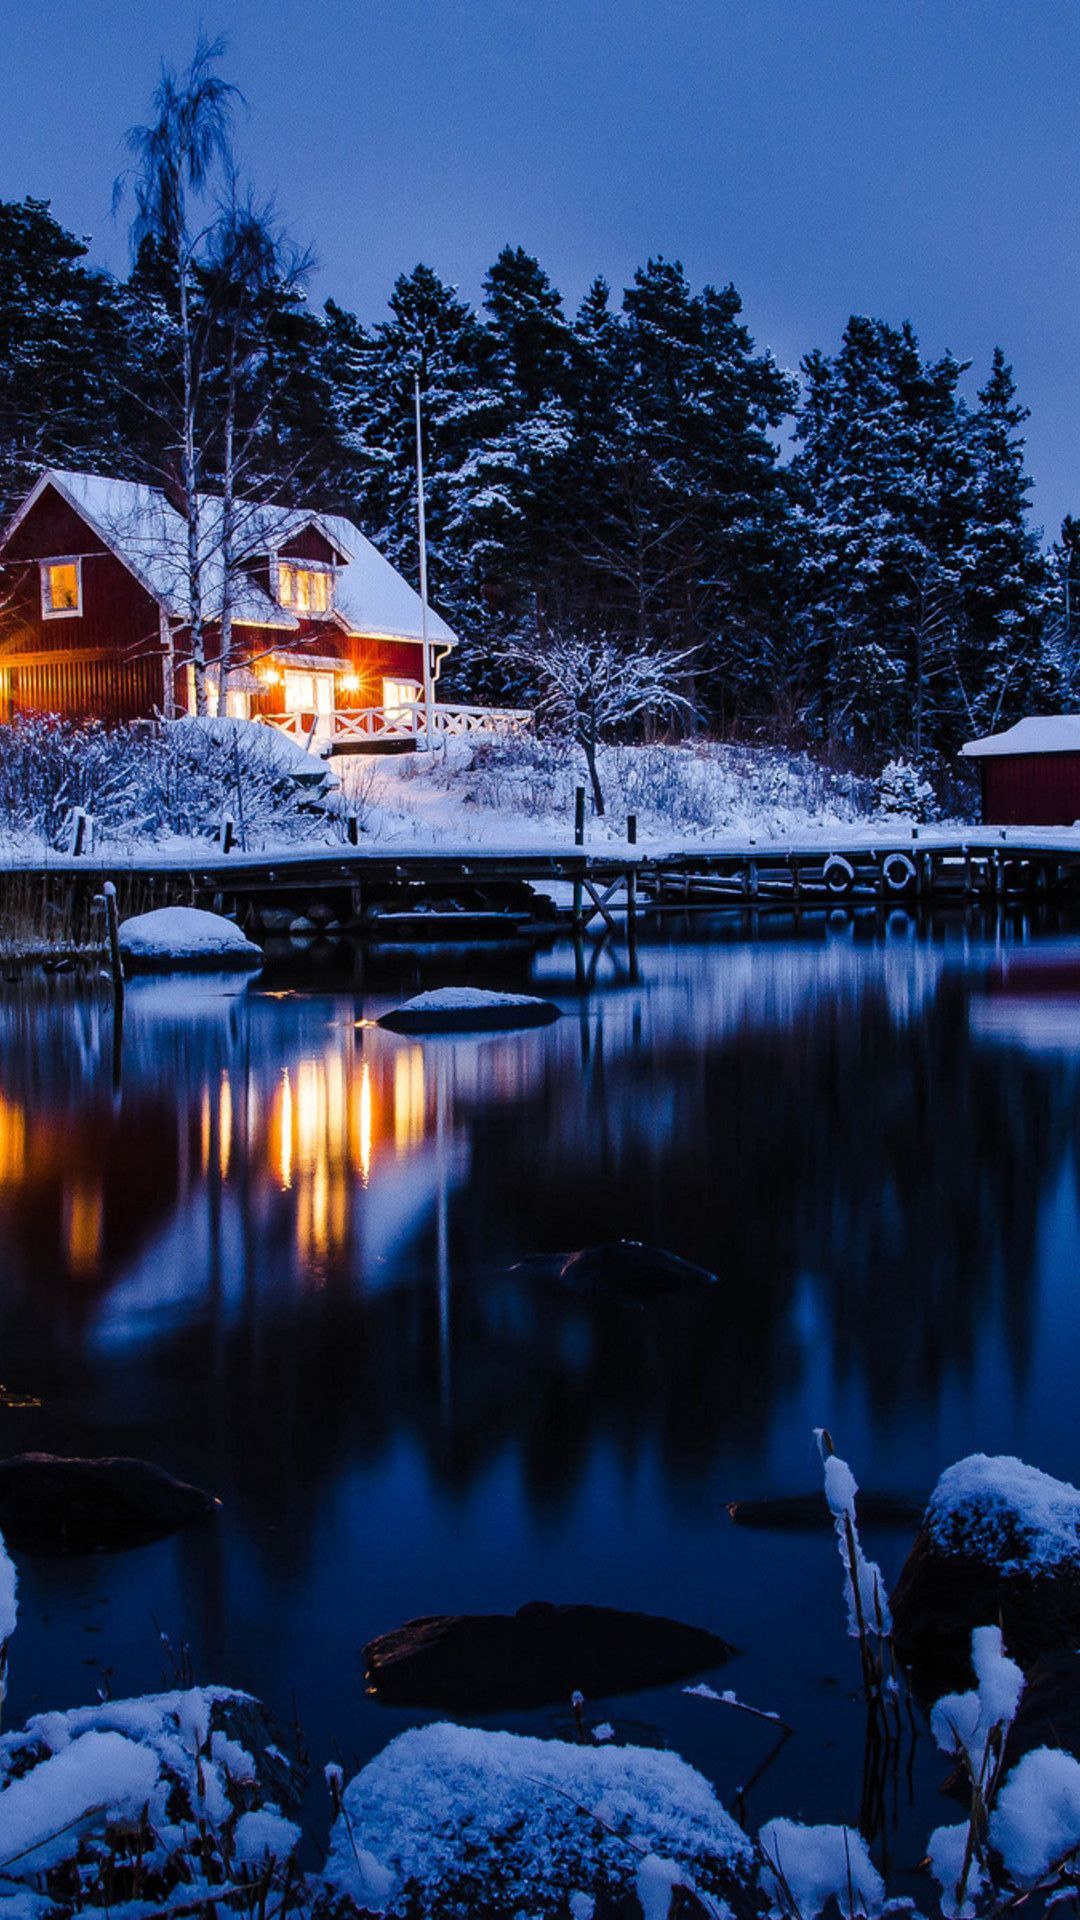 Wallpaper Download 1080x1920 Winter holiday night at the cottage in the mountain. Winter Wallpaper. Seasons. Winter wallpaper, Holiday nights, Mountain wallpaper